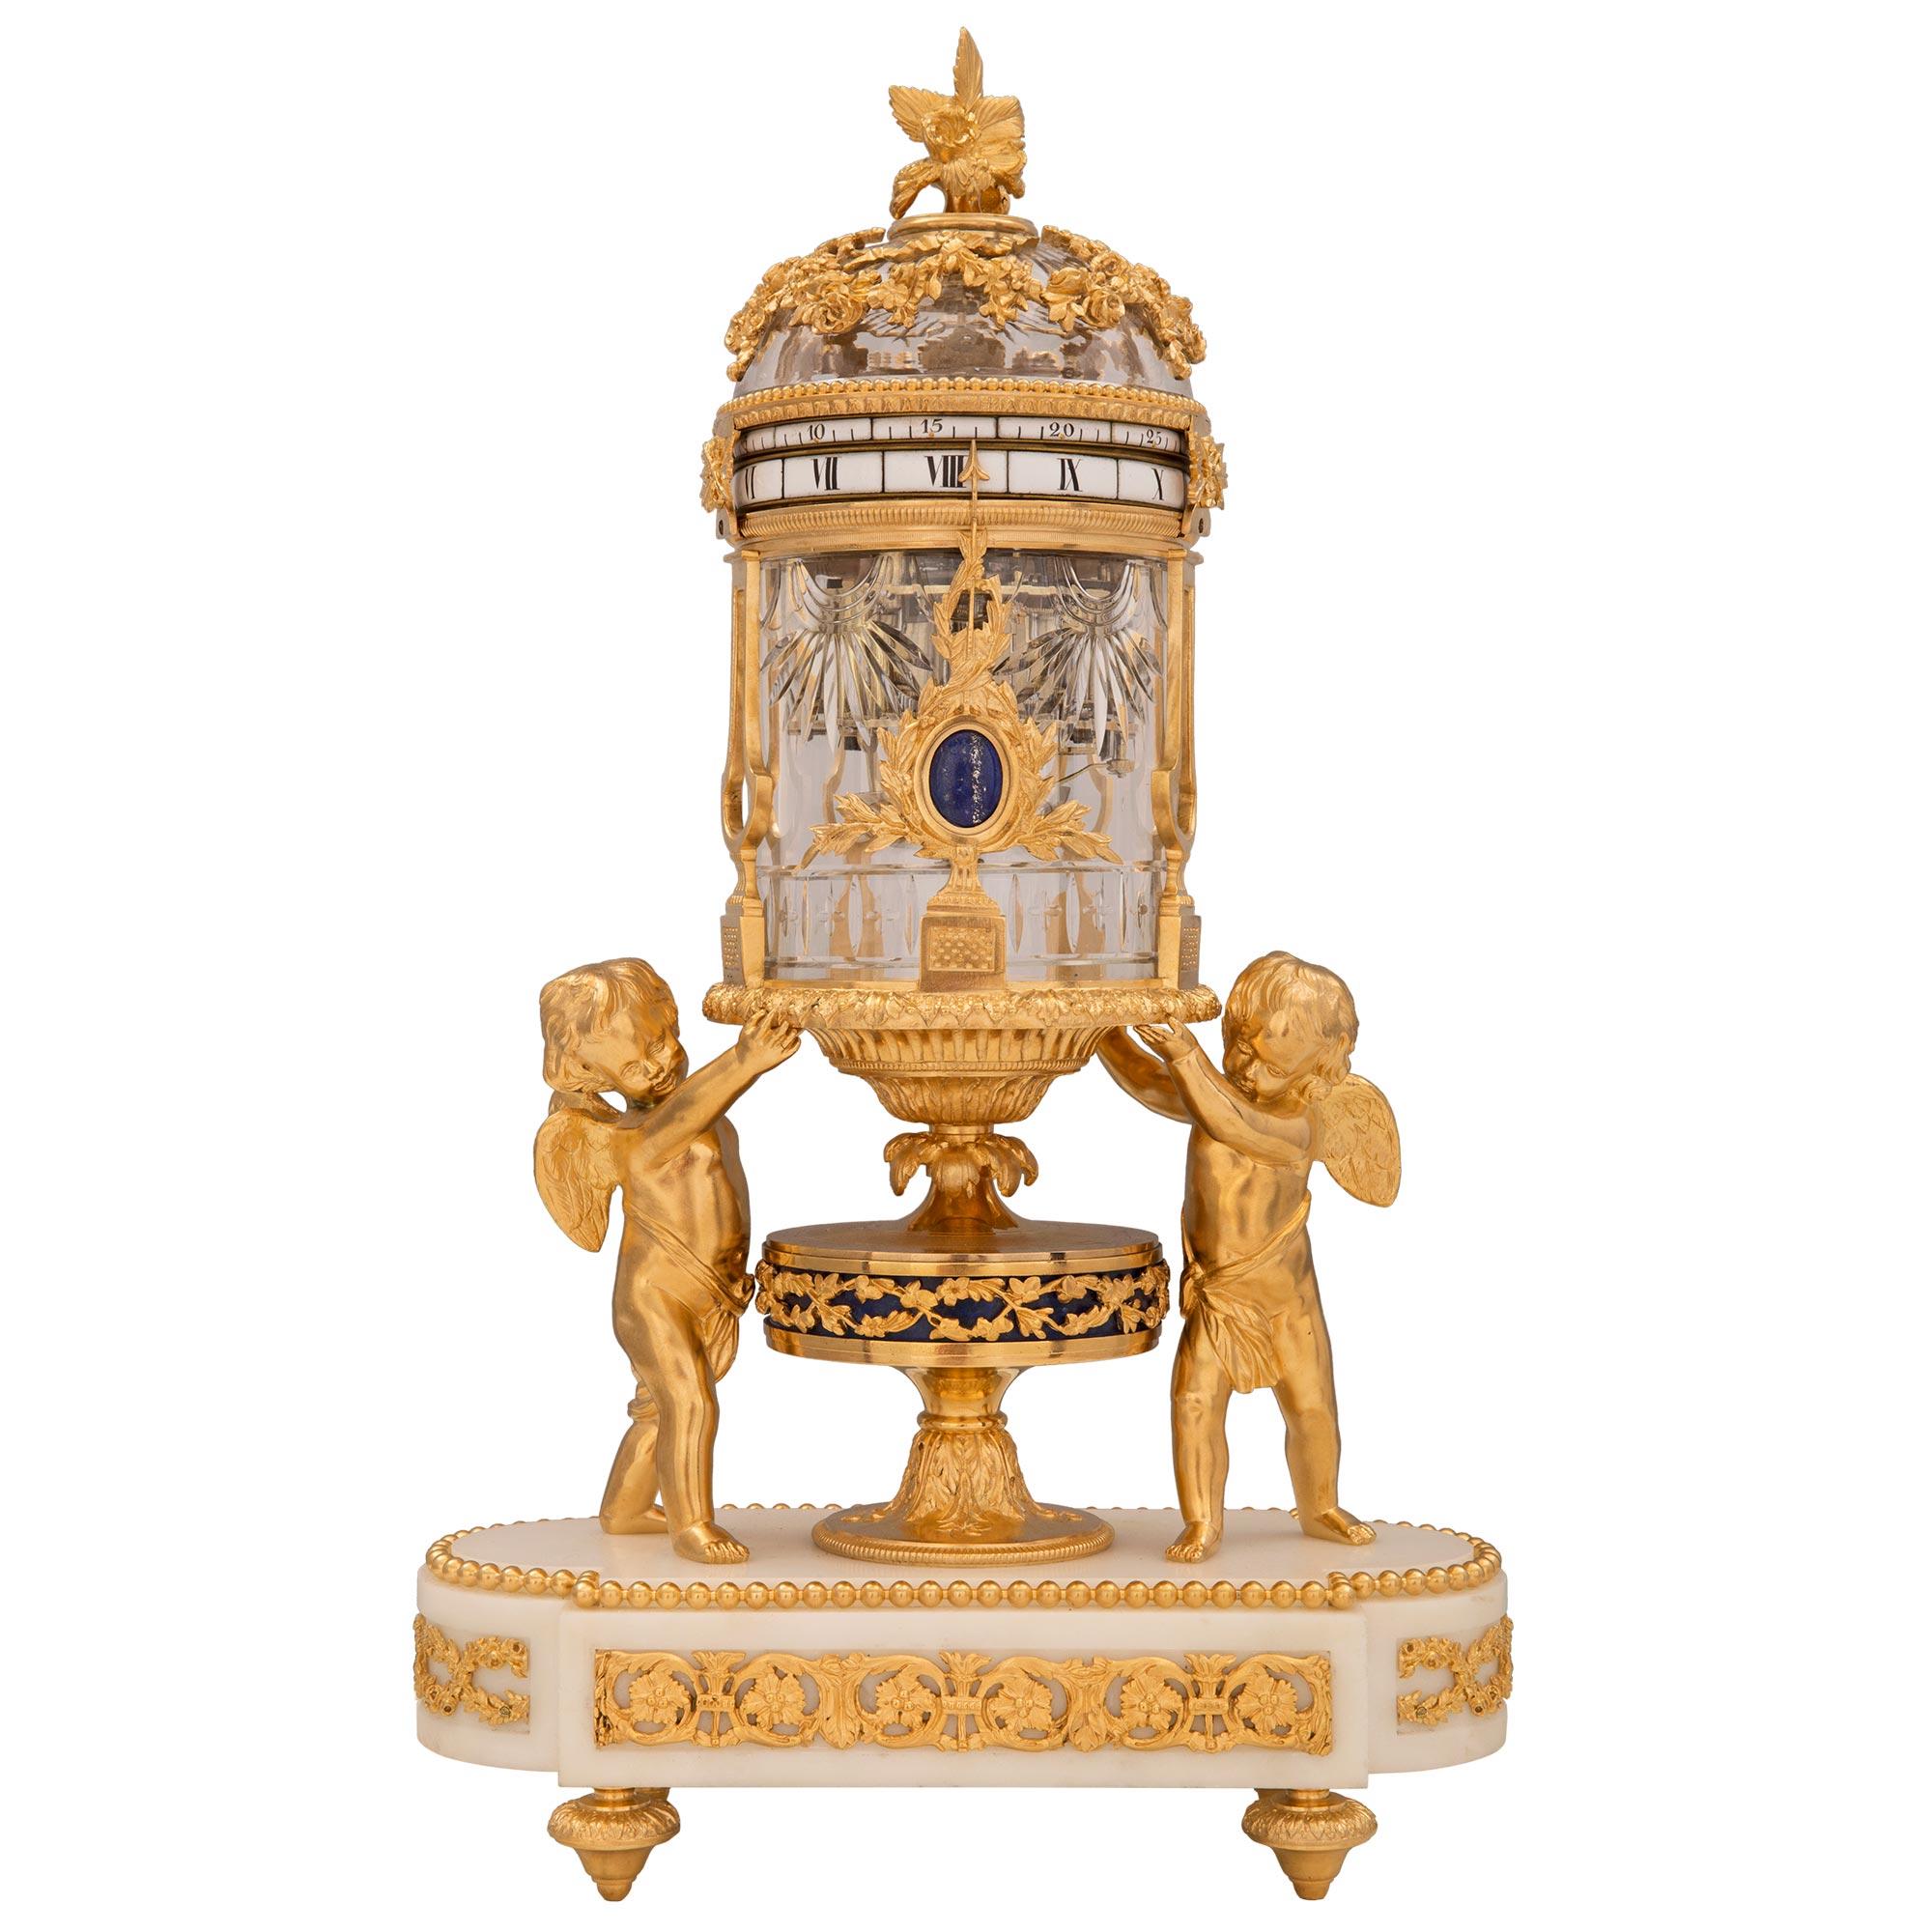 A stunning and extremely high quality French 19th century Louis XVI st. Belle Époque period ormolu, white Carrara marble, Lapis Lazuli, and Baccarat crystal garniture set retailed by Tiffany & Co. The central striking annular clock is raised by